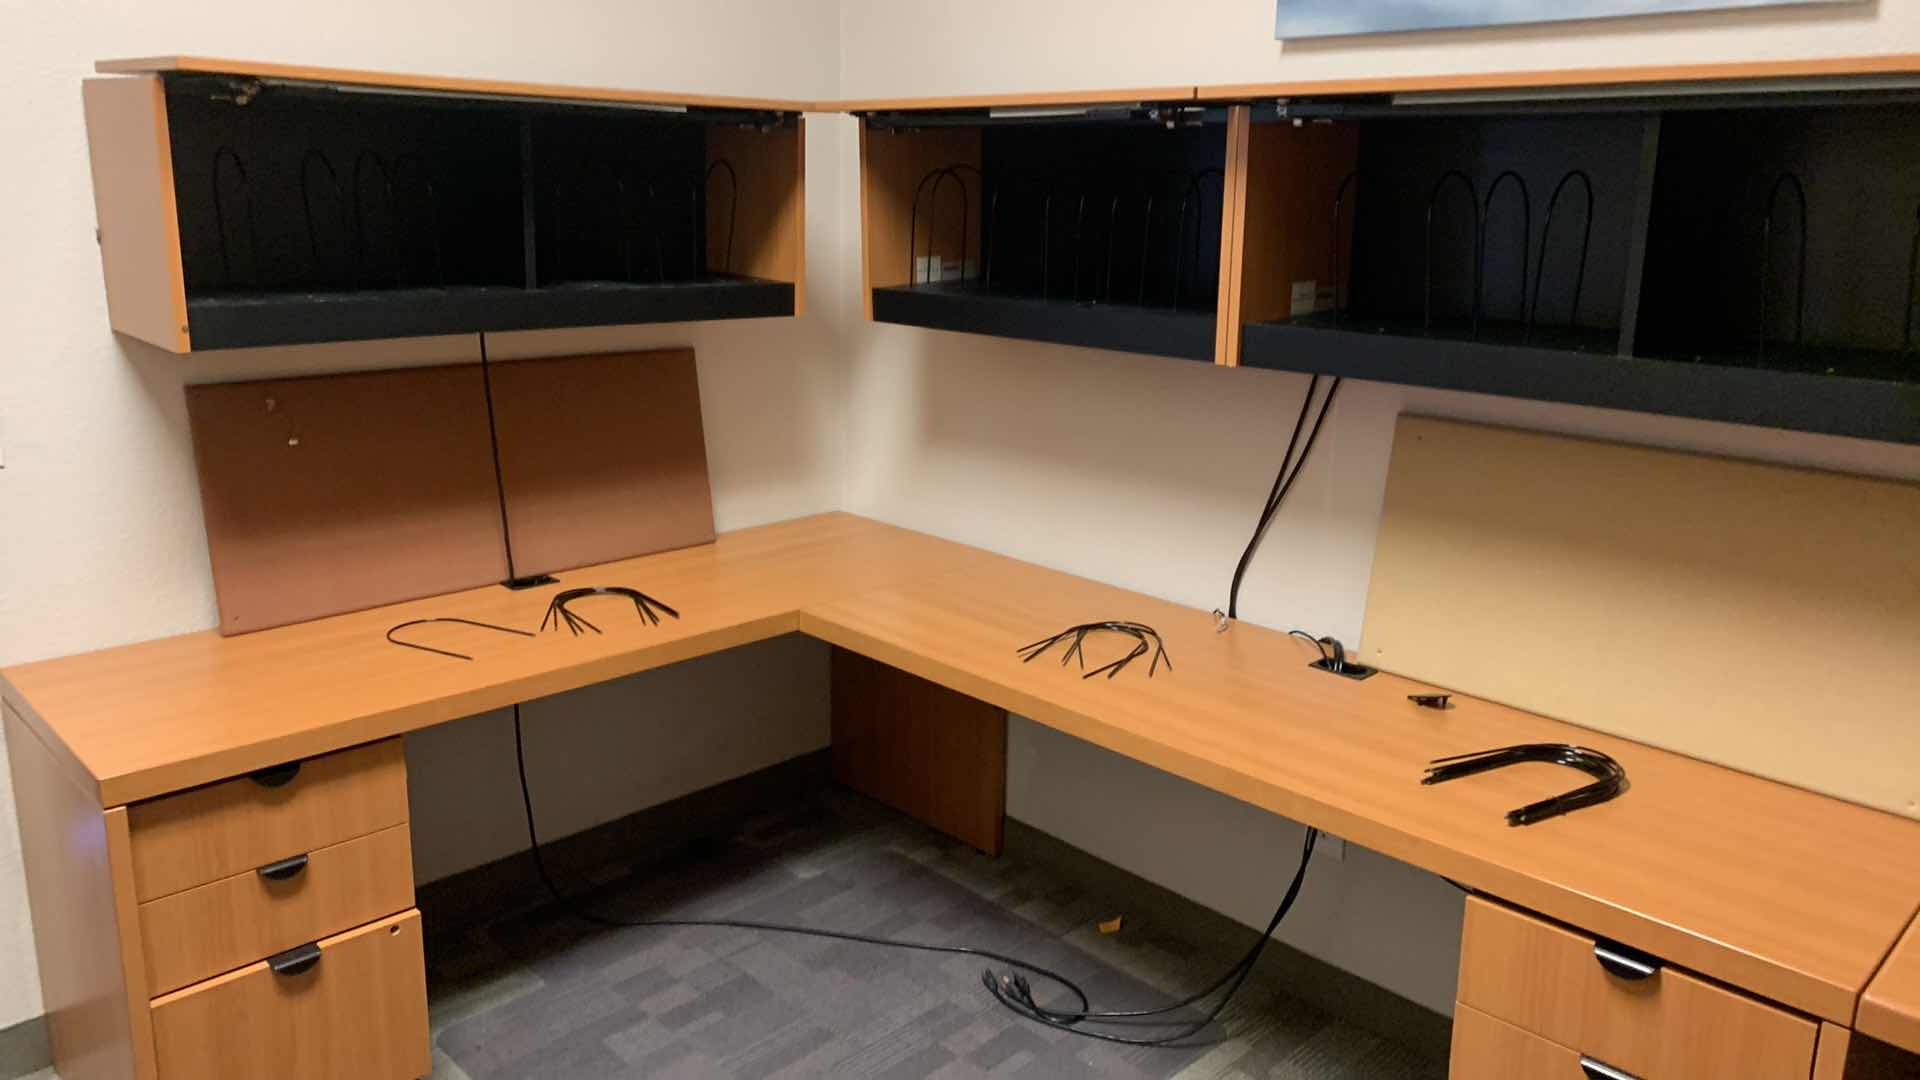 Photo 7 of MAGNA DESIGN LAS VEGAS WOOD WORK STATION/ OFFICE CORNER DESK UNIT TWO LOWER DESKS  72” x 24 WITH FILE CABINETS, TWO SOUND BOARDS AND THREE UPPER CABINETS WITH LIGHTS AND METAL DIVIDERS